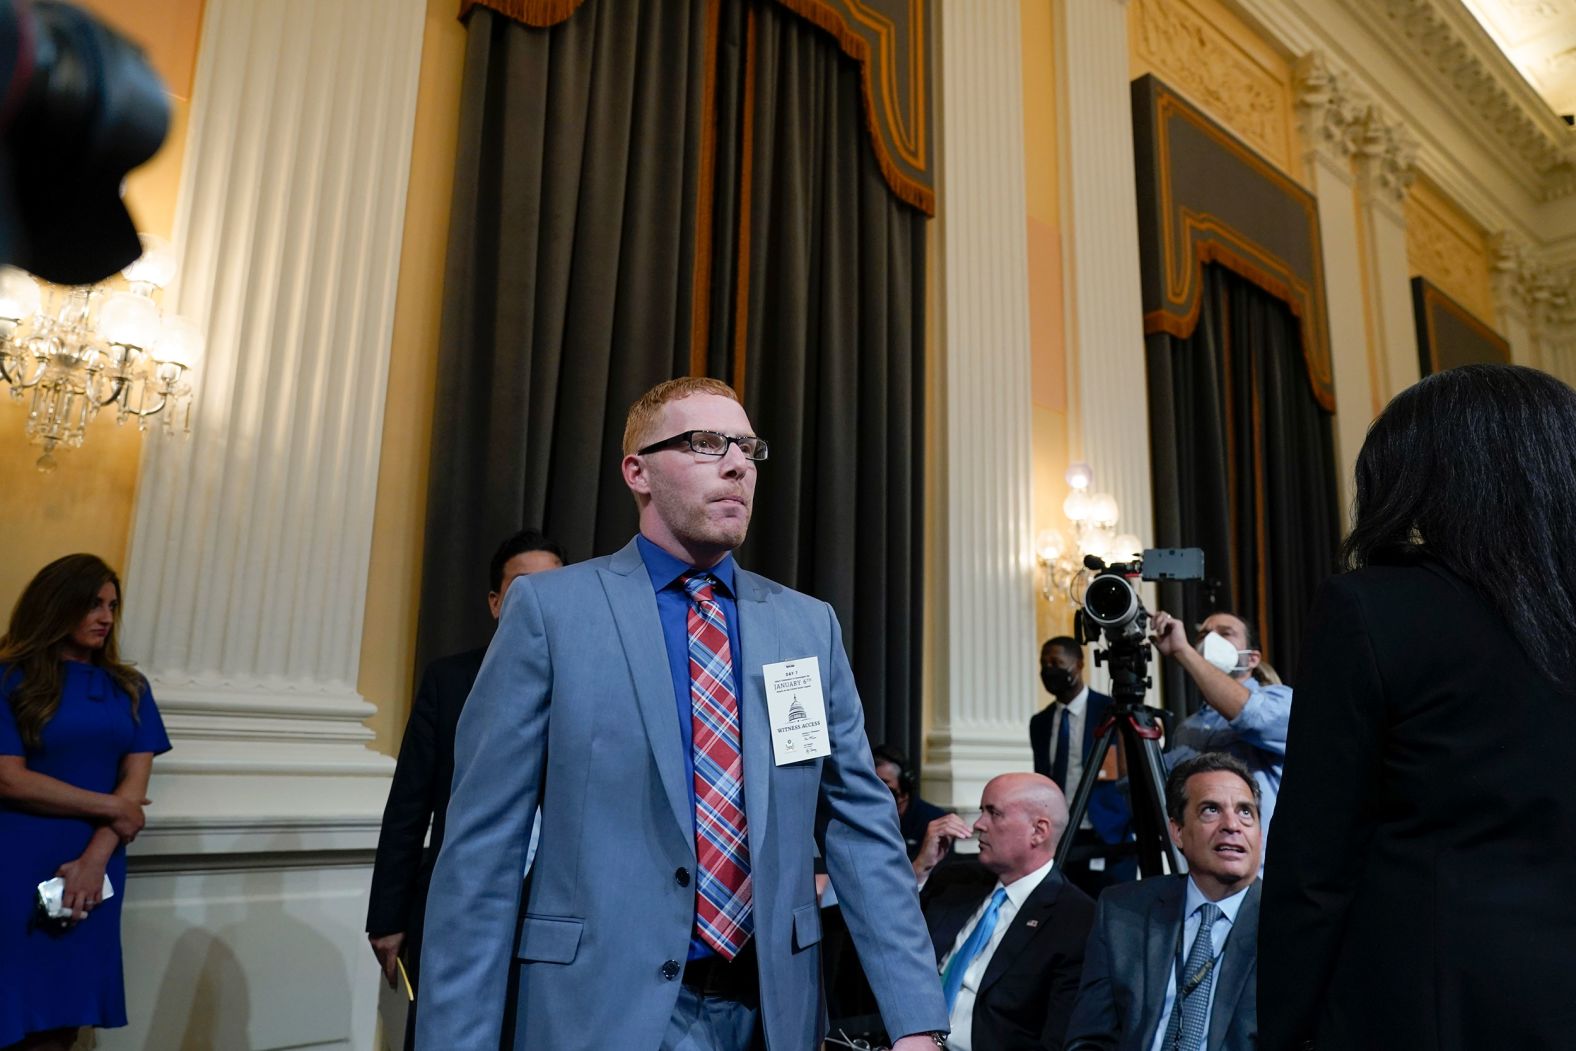 Ayres, who in June pleaded guilty to entering the Capitol illegally, arrives to testify on July 12. <a href="index.php?page=&url=https%3A%2F%2Fwww.cnn.com%2Fpolitics%2Flive-news%2Fjanuary-6-hearings-july-12%2Fh_b3aeb2734cbef30a181e581644c7425b" target="_blank">Ayres said in his testimony</a> that he believed that Trump would be marching to the Capitol with his supporters on January 6: "I think everybody thought he would be coming down. He said in his speech ... it was kind of like he was going to be there with us. ... I believed it."